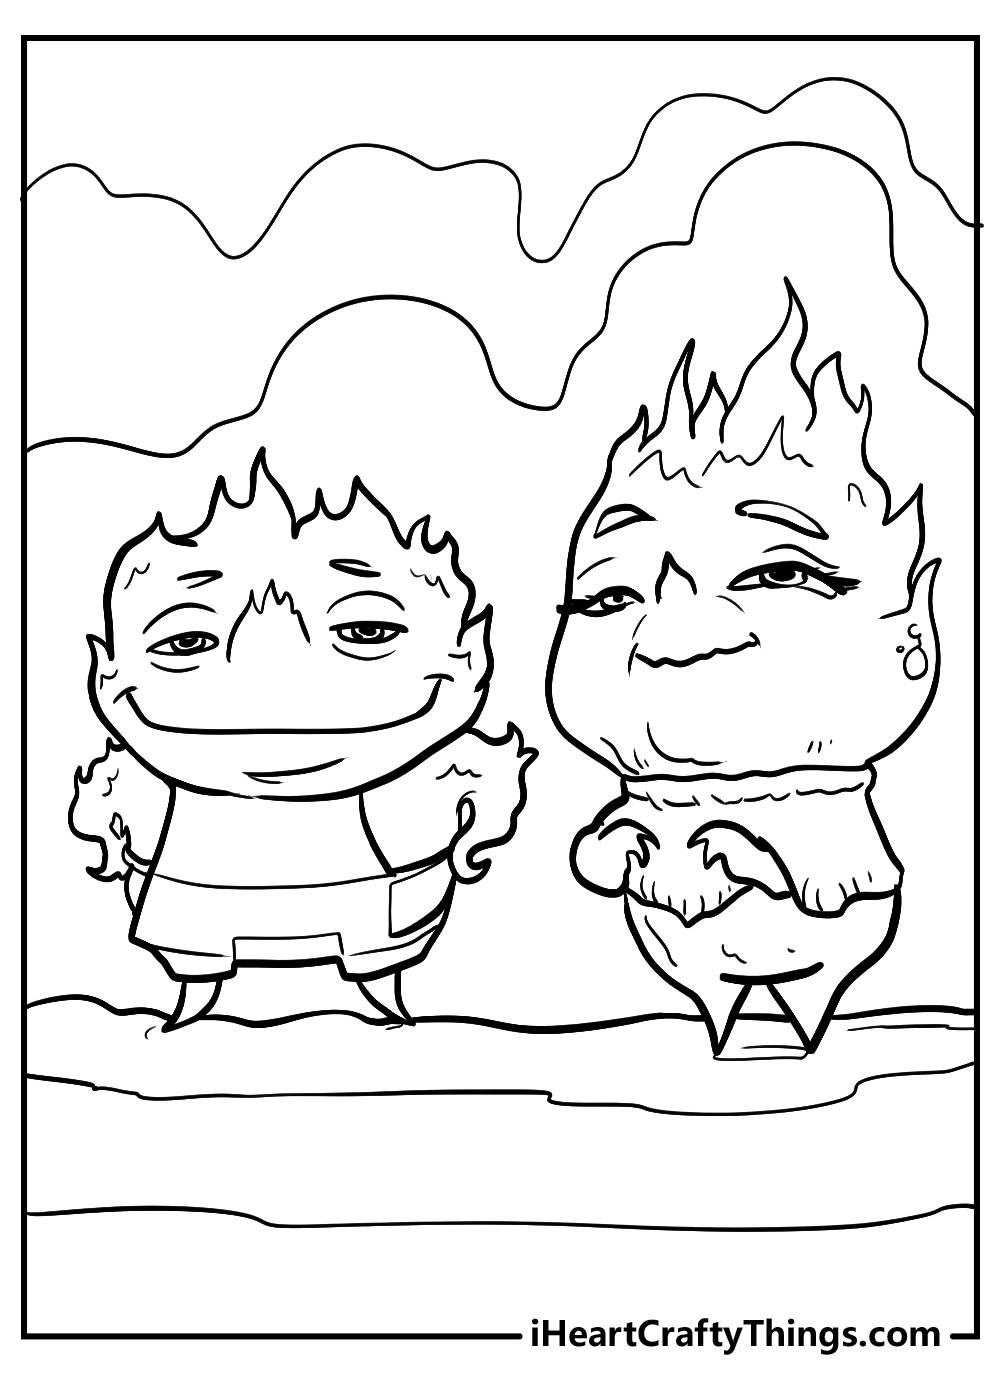 Bernie and Cinder elemental coloring pages